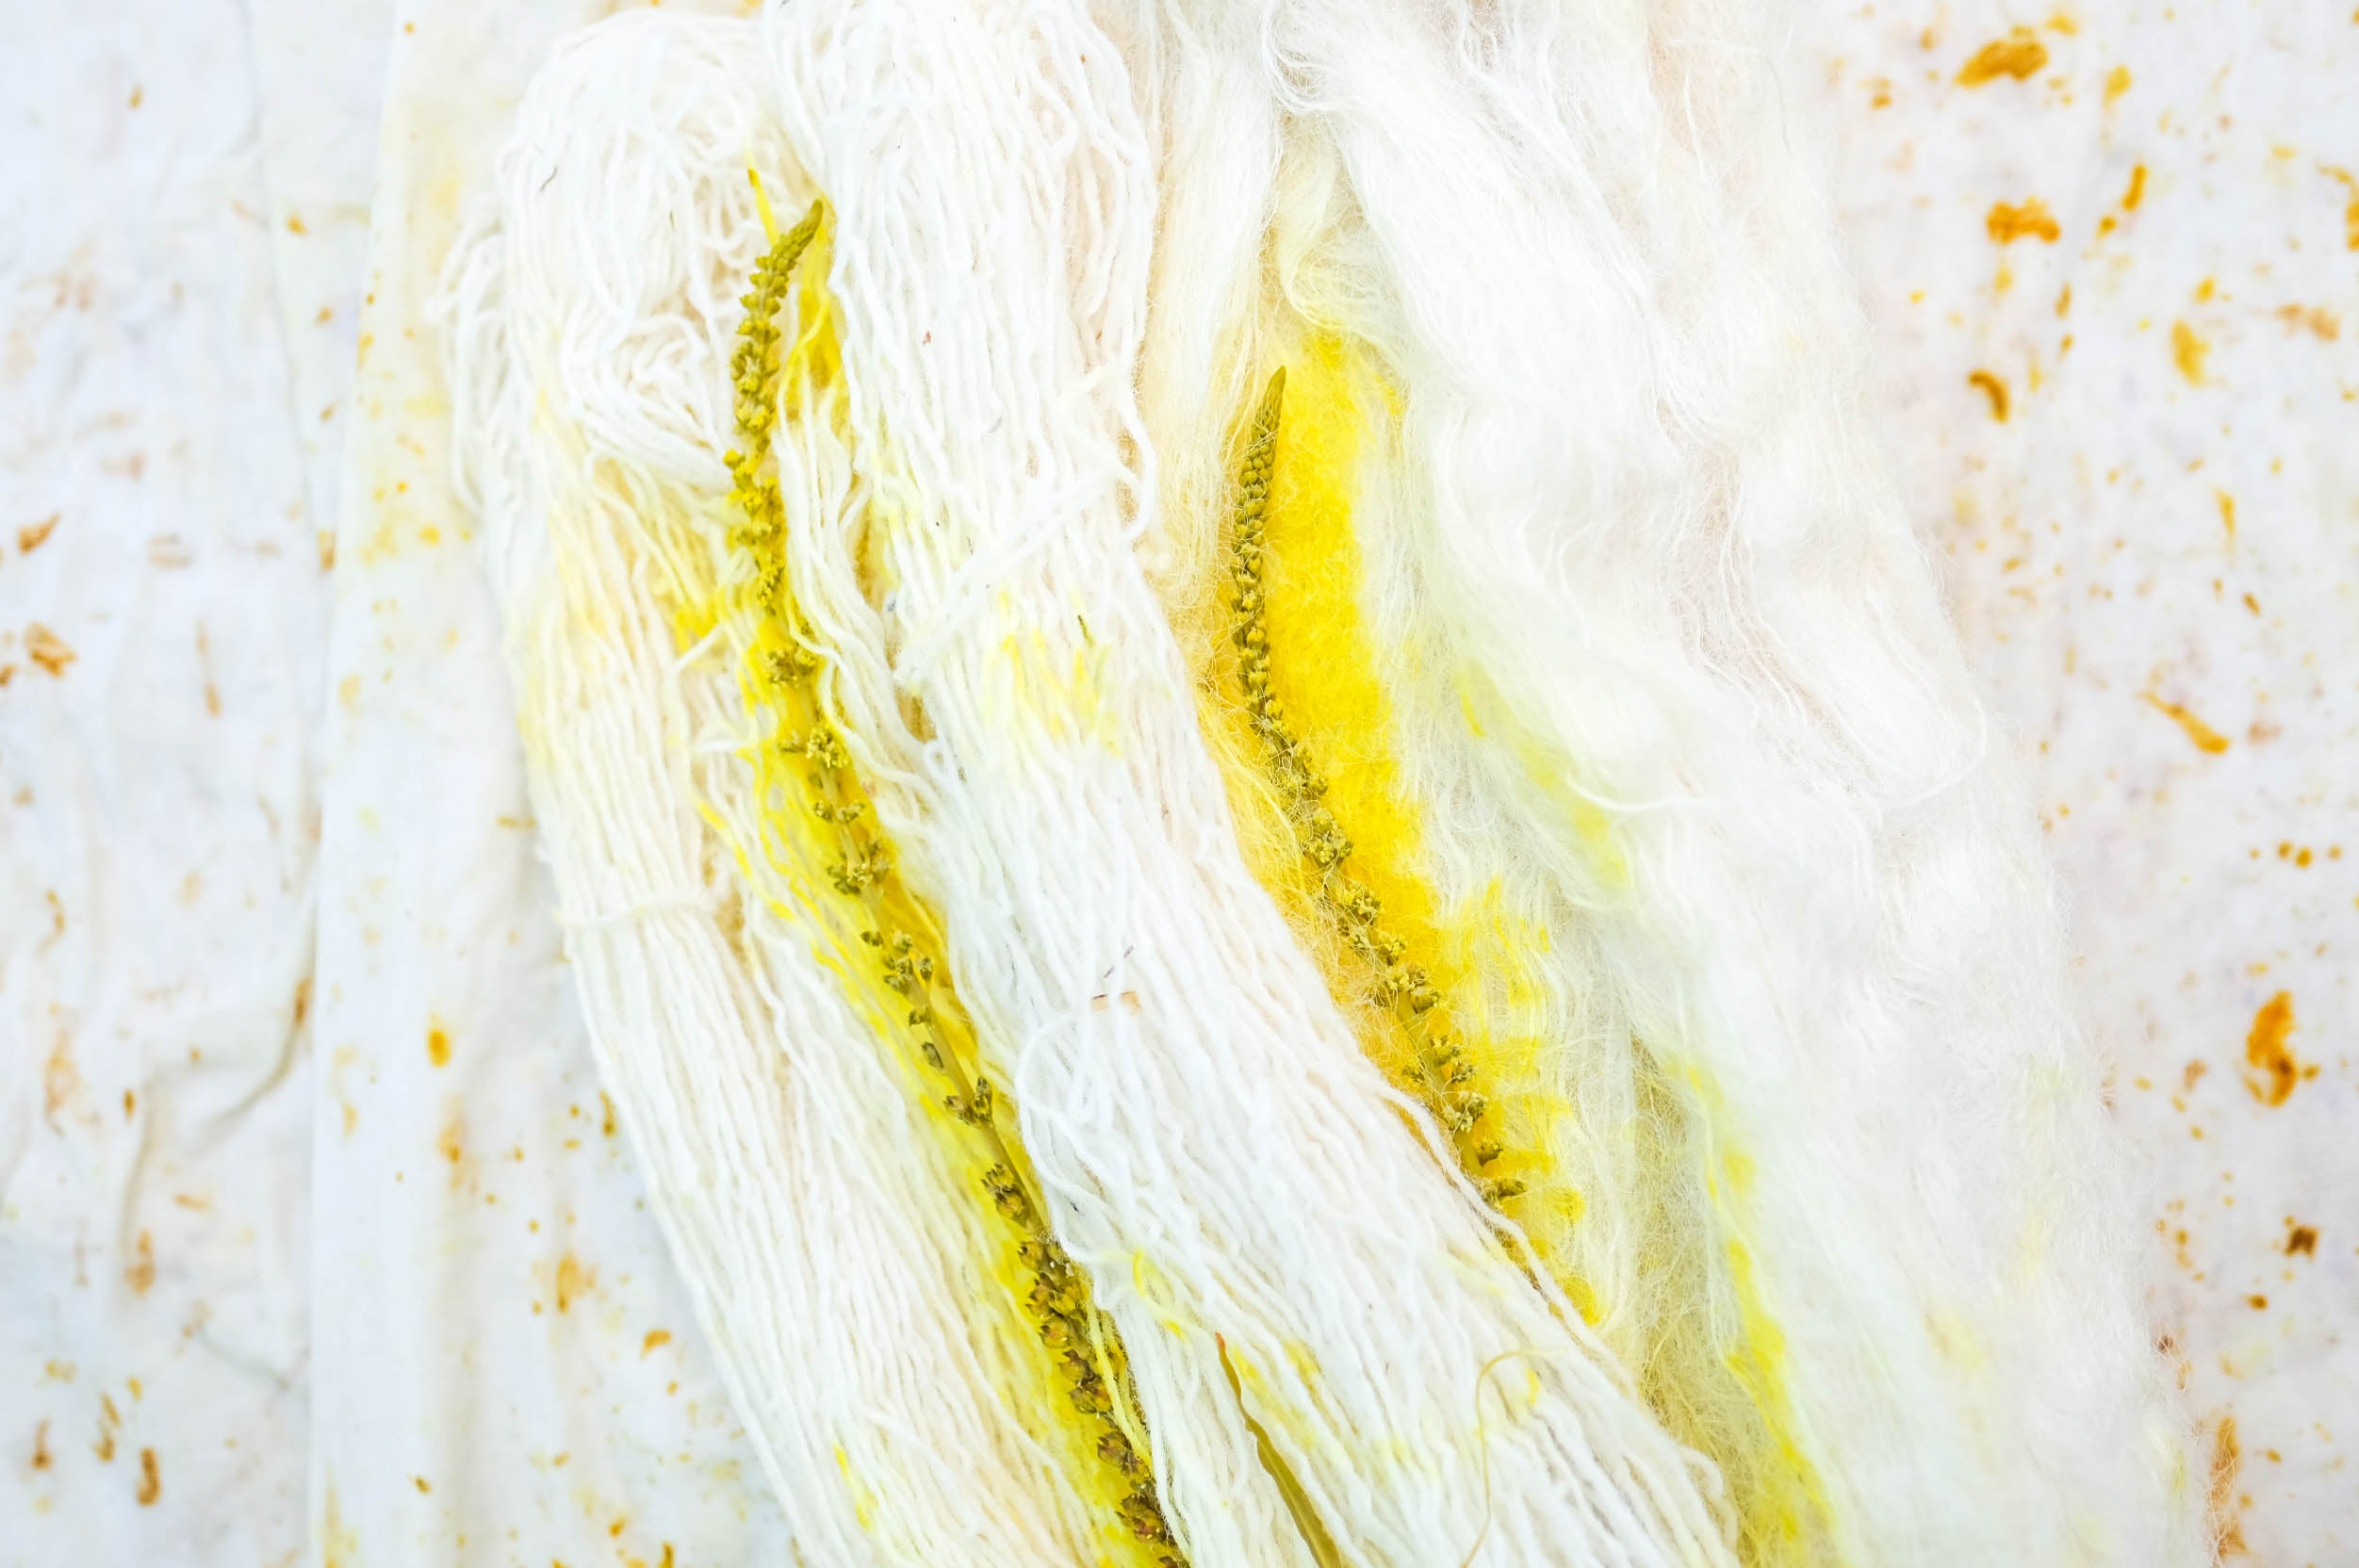 2023 Summer Solstice Special Color: Fennel Fronds and the Beat of the Butterfly's Wings